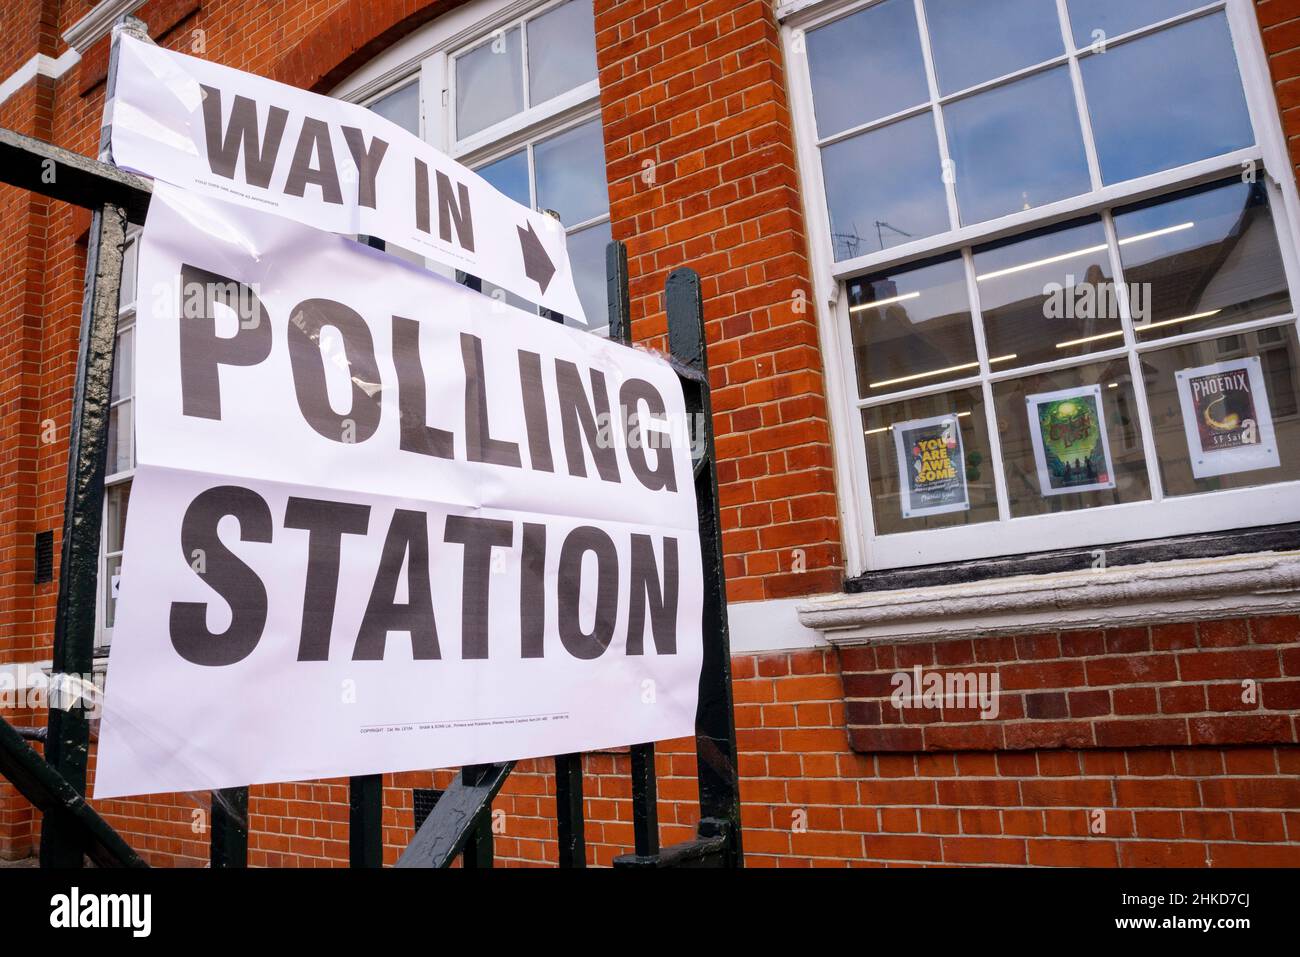 Polling station in a school for the Southend West by-election to replace murdered MP Sir David Amess. Way in, polling station printed paper sign Stock Photo